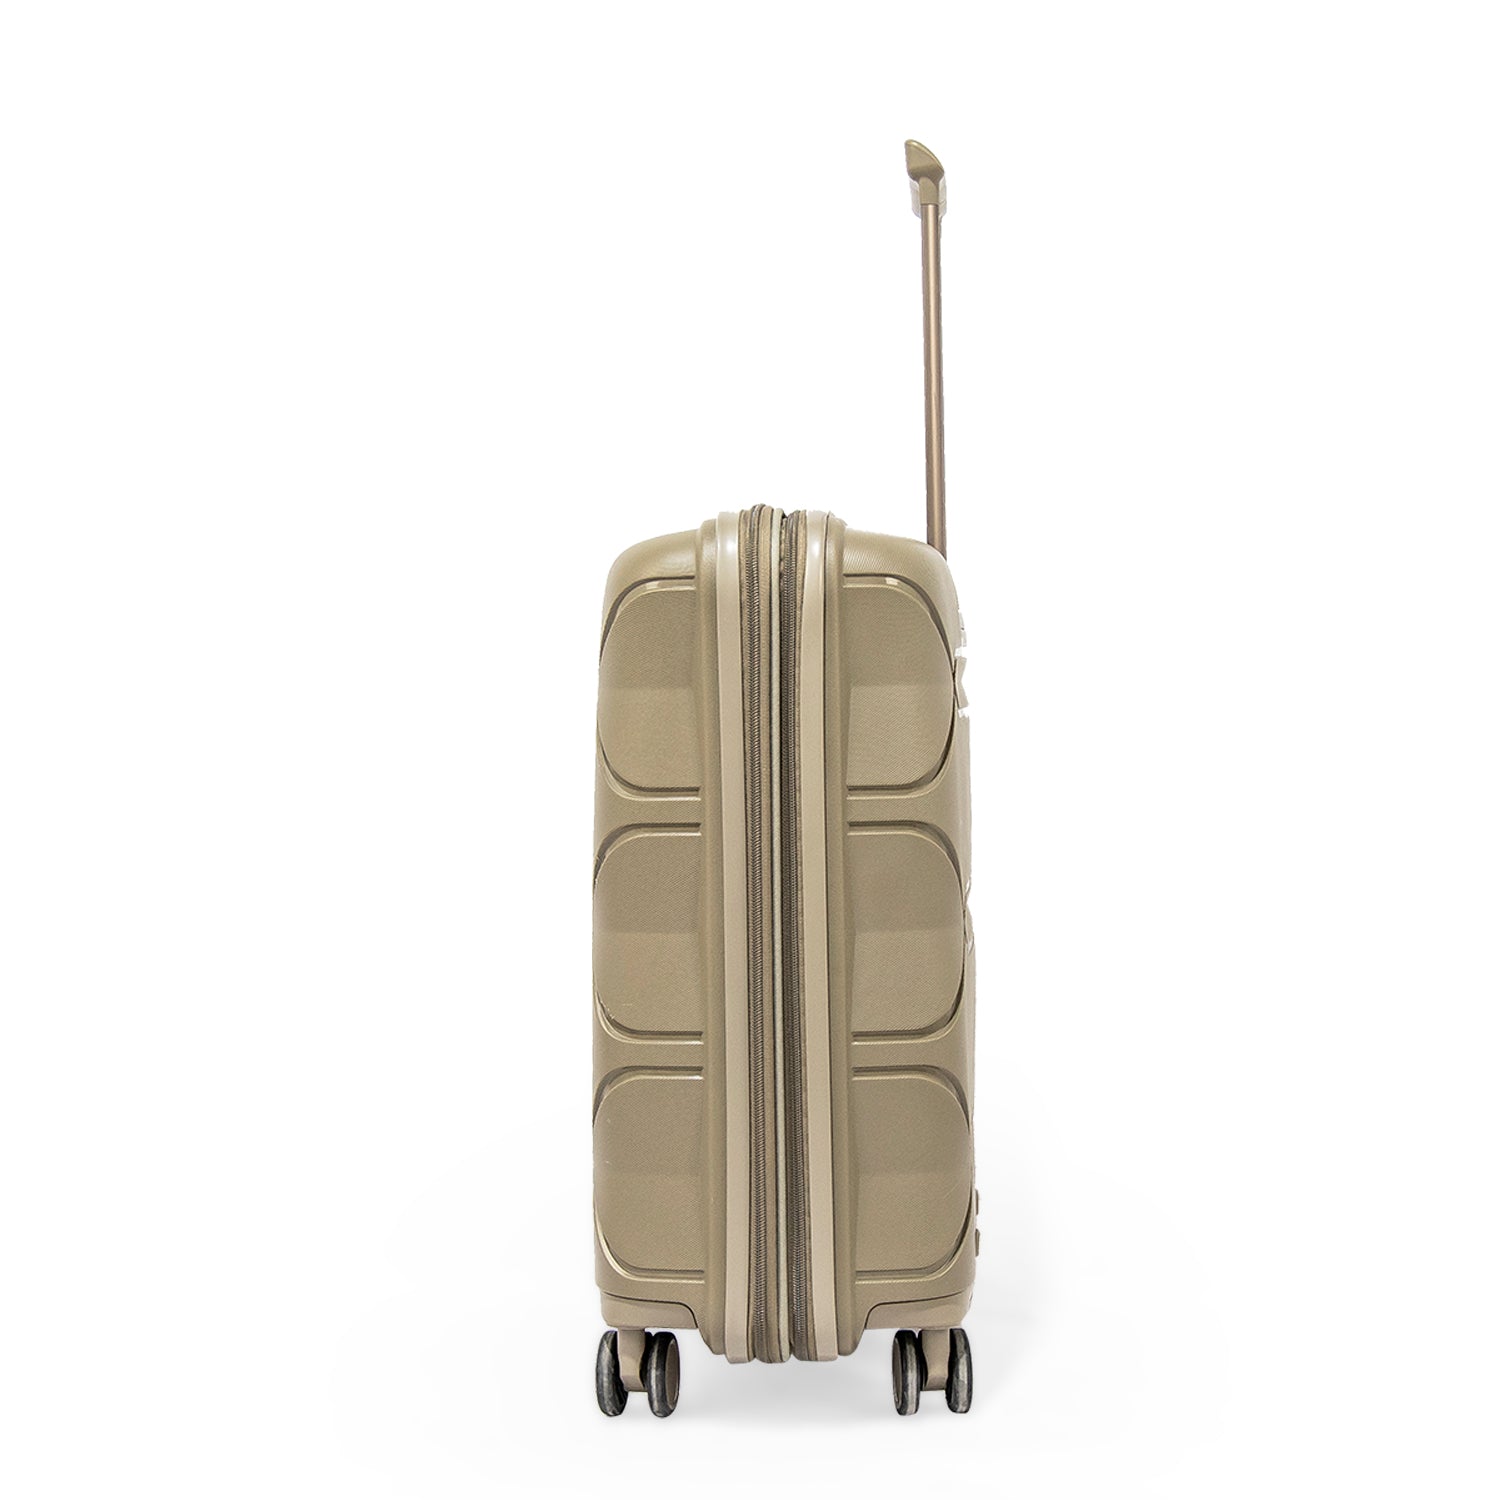 Pierre Cardin Trolley Strong Flexible Suitcases Set of 3 Champagne